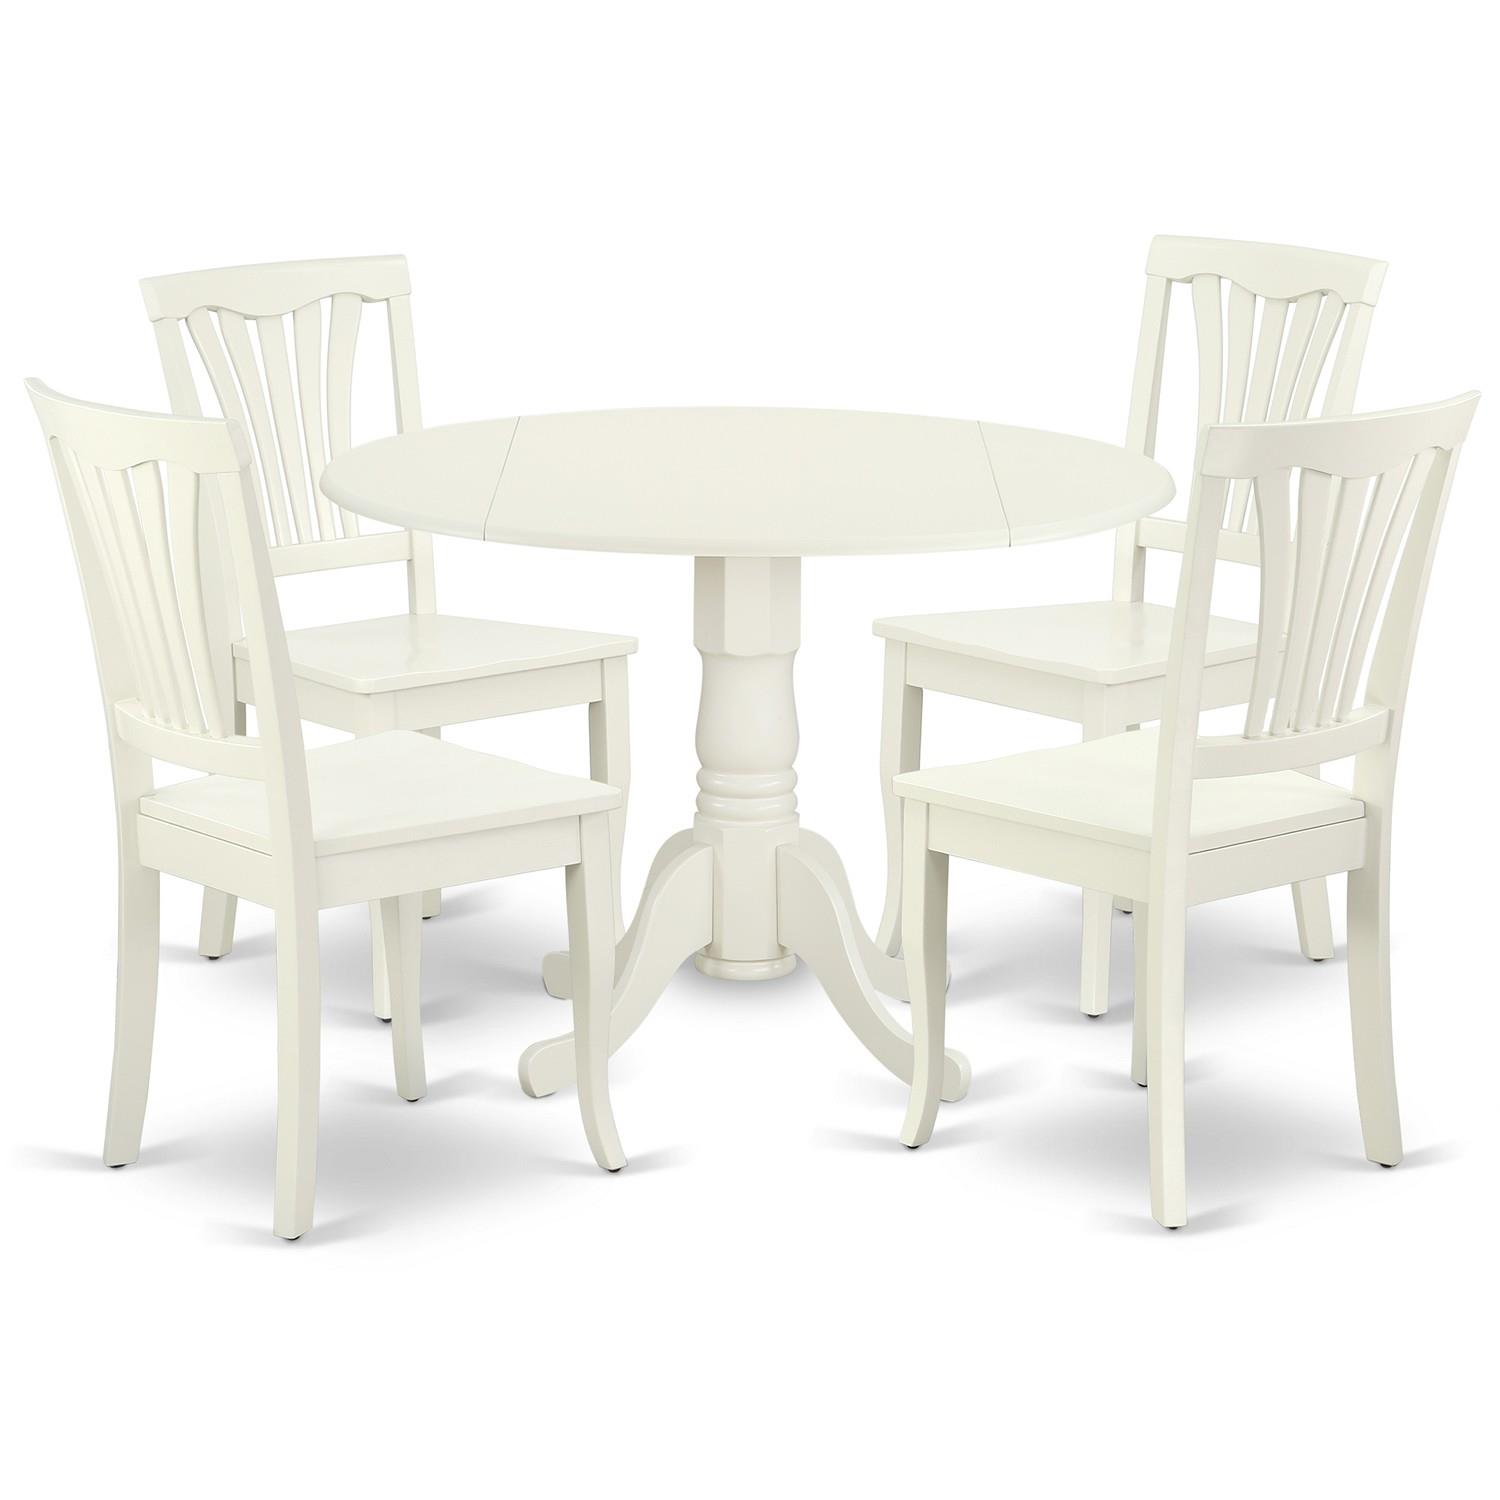 East West Furniture DLAV5-LWH-W 5PC Round 42 inch Table with Two 9-Inch Drop Leaves and 4 vertical slatted Chairs